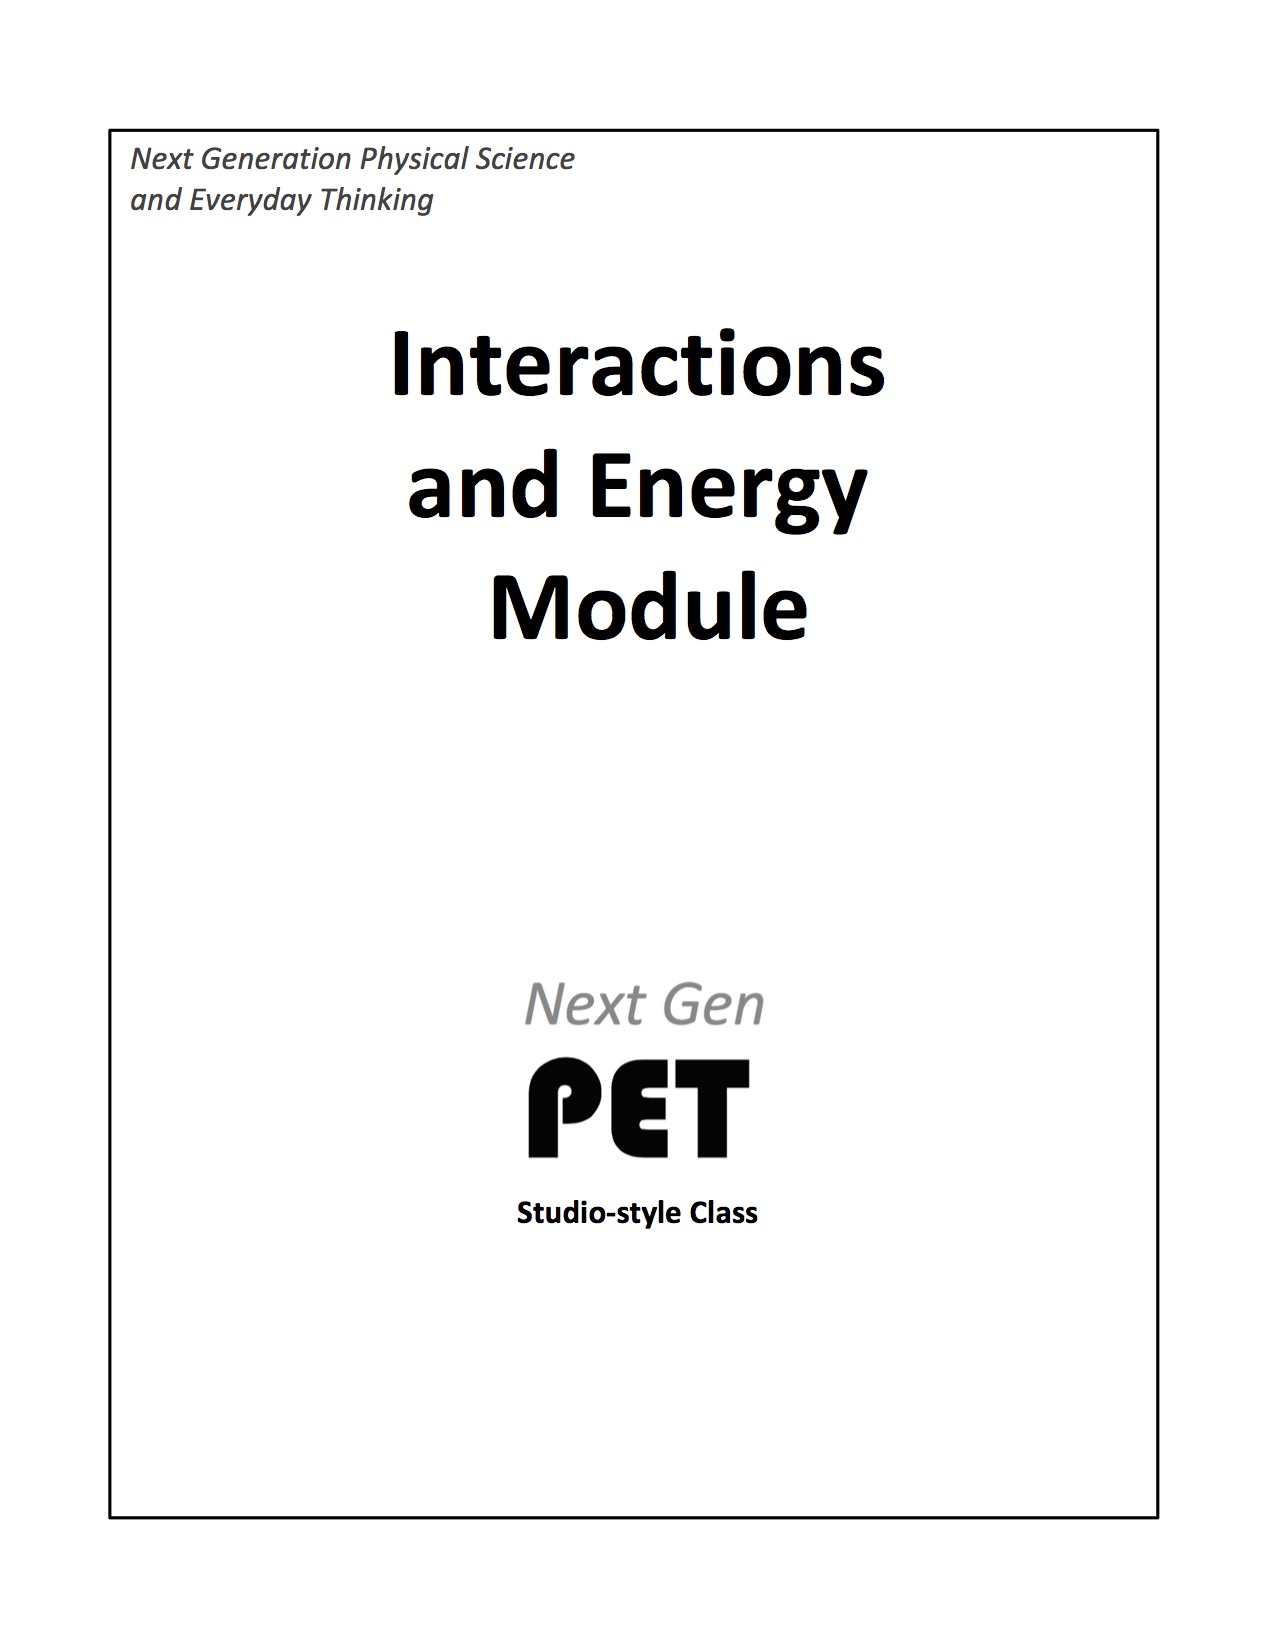 Module IE: Interactions and Energy